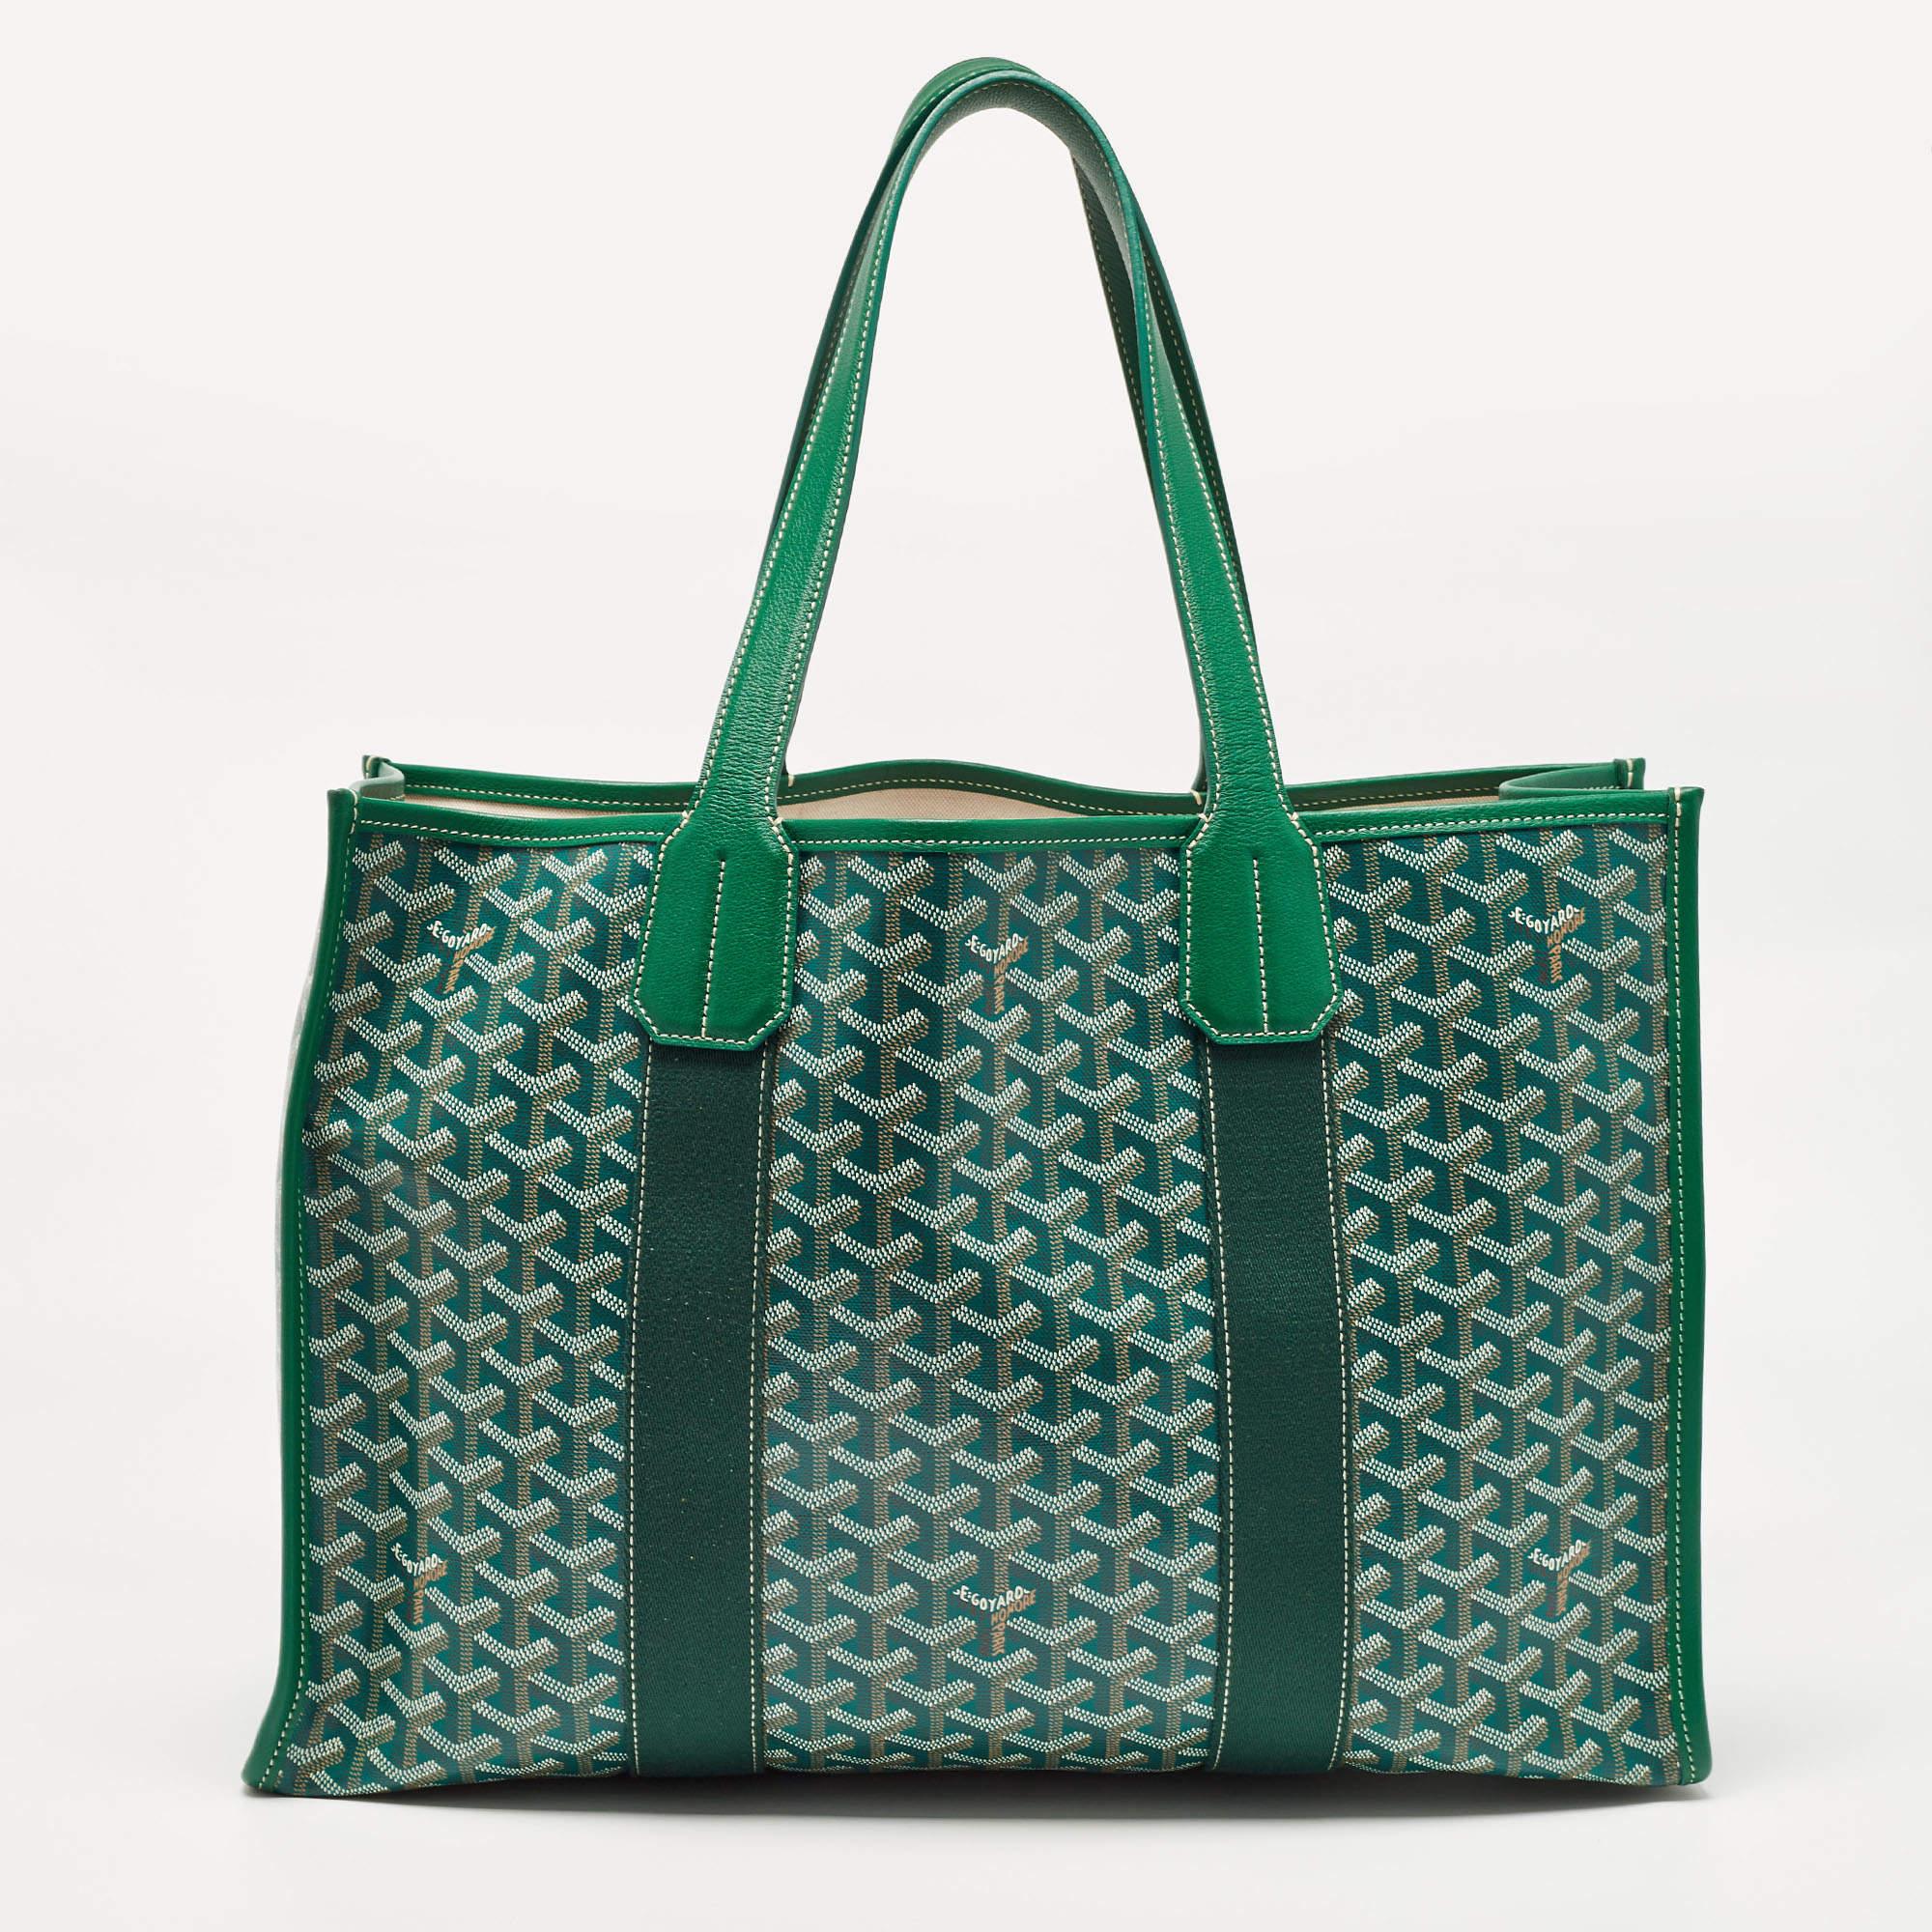 The Goyard Villette tote is an exquisite luxury handbag. Its vibrant green Goyardine canvas is complemented by fine leather accents. This spacious tote offers a stylish, functional accessory for everyday use.

Includes: Original Dustbag

